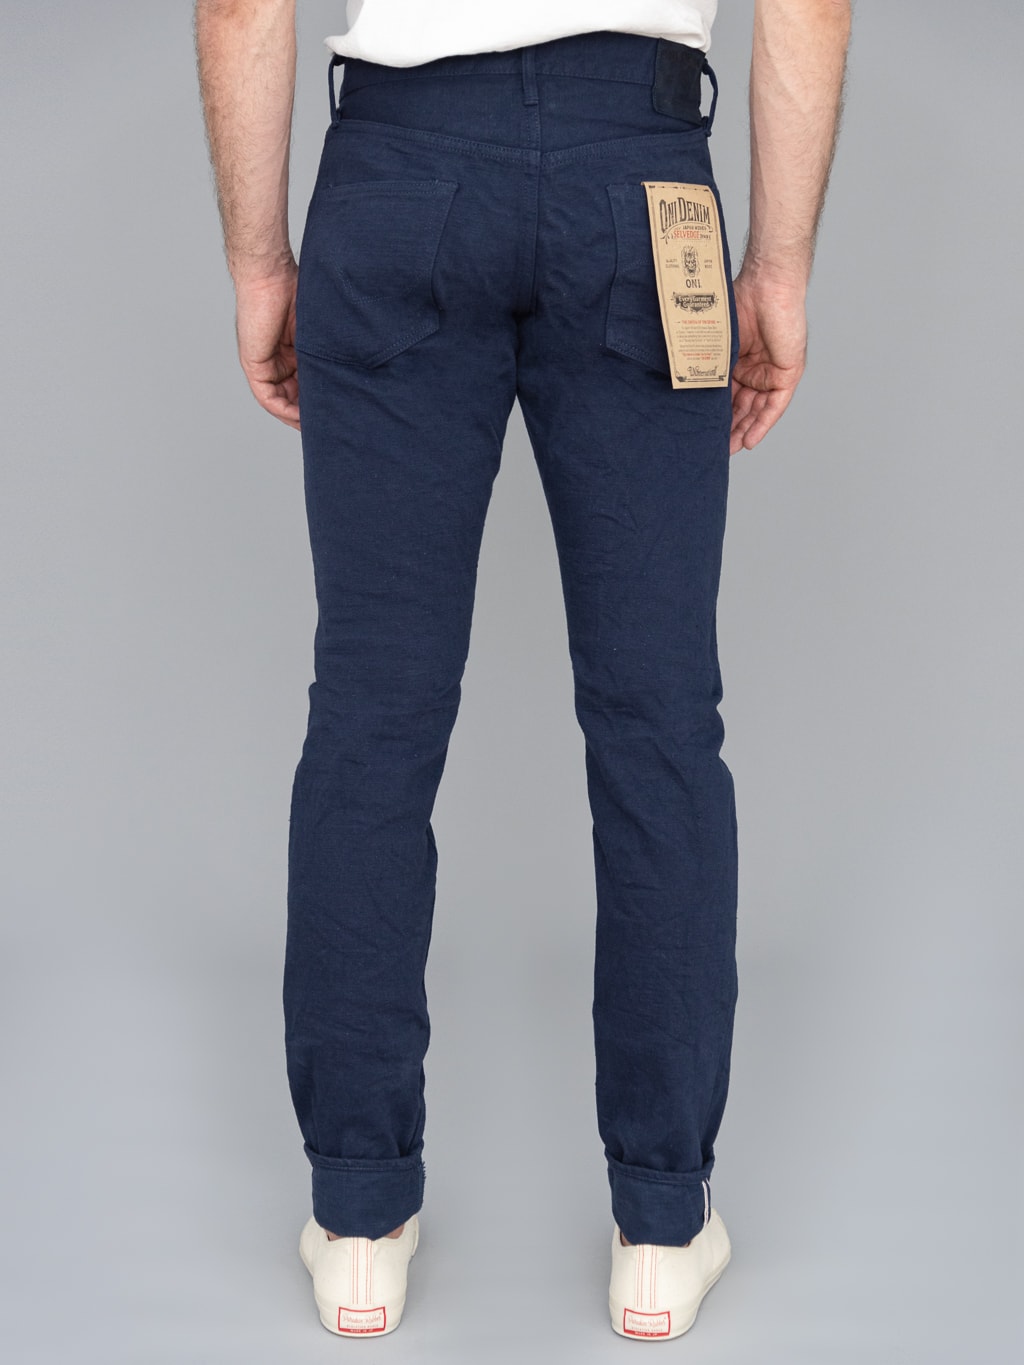 ONI Denim 612 Super Low Tension Navy Relaxed Tapered Jeans back